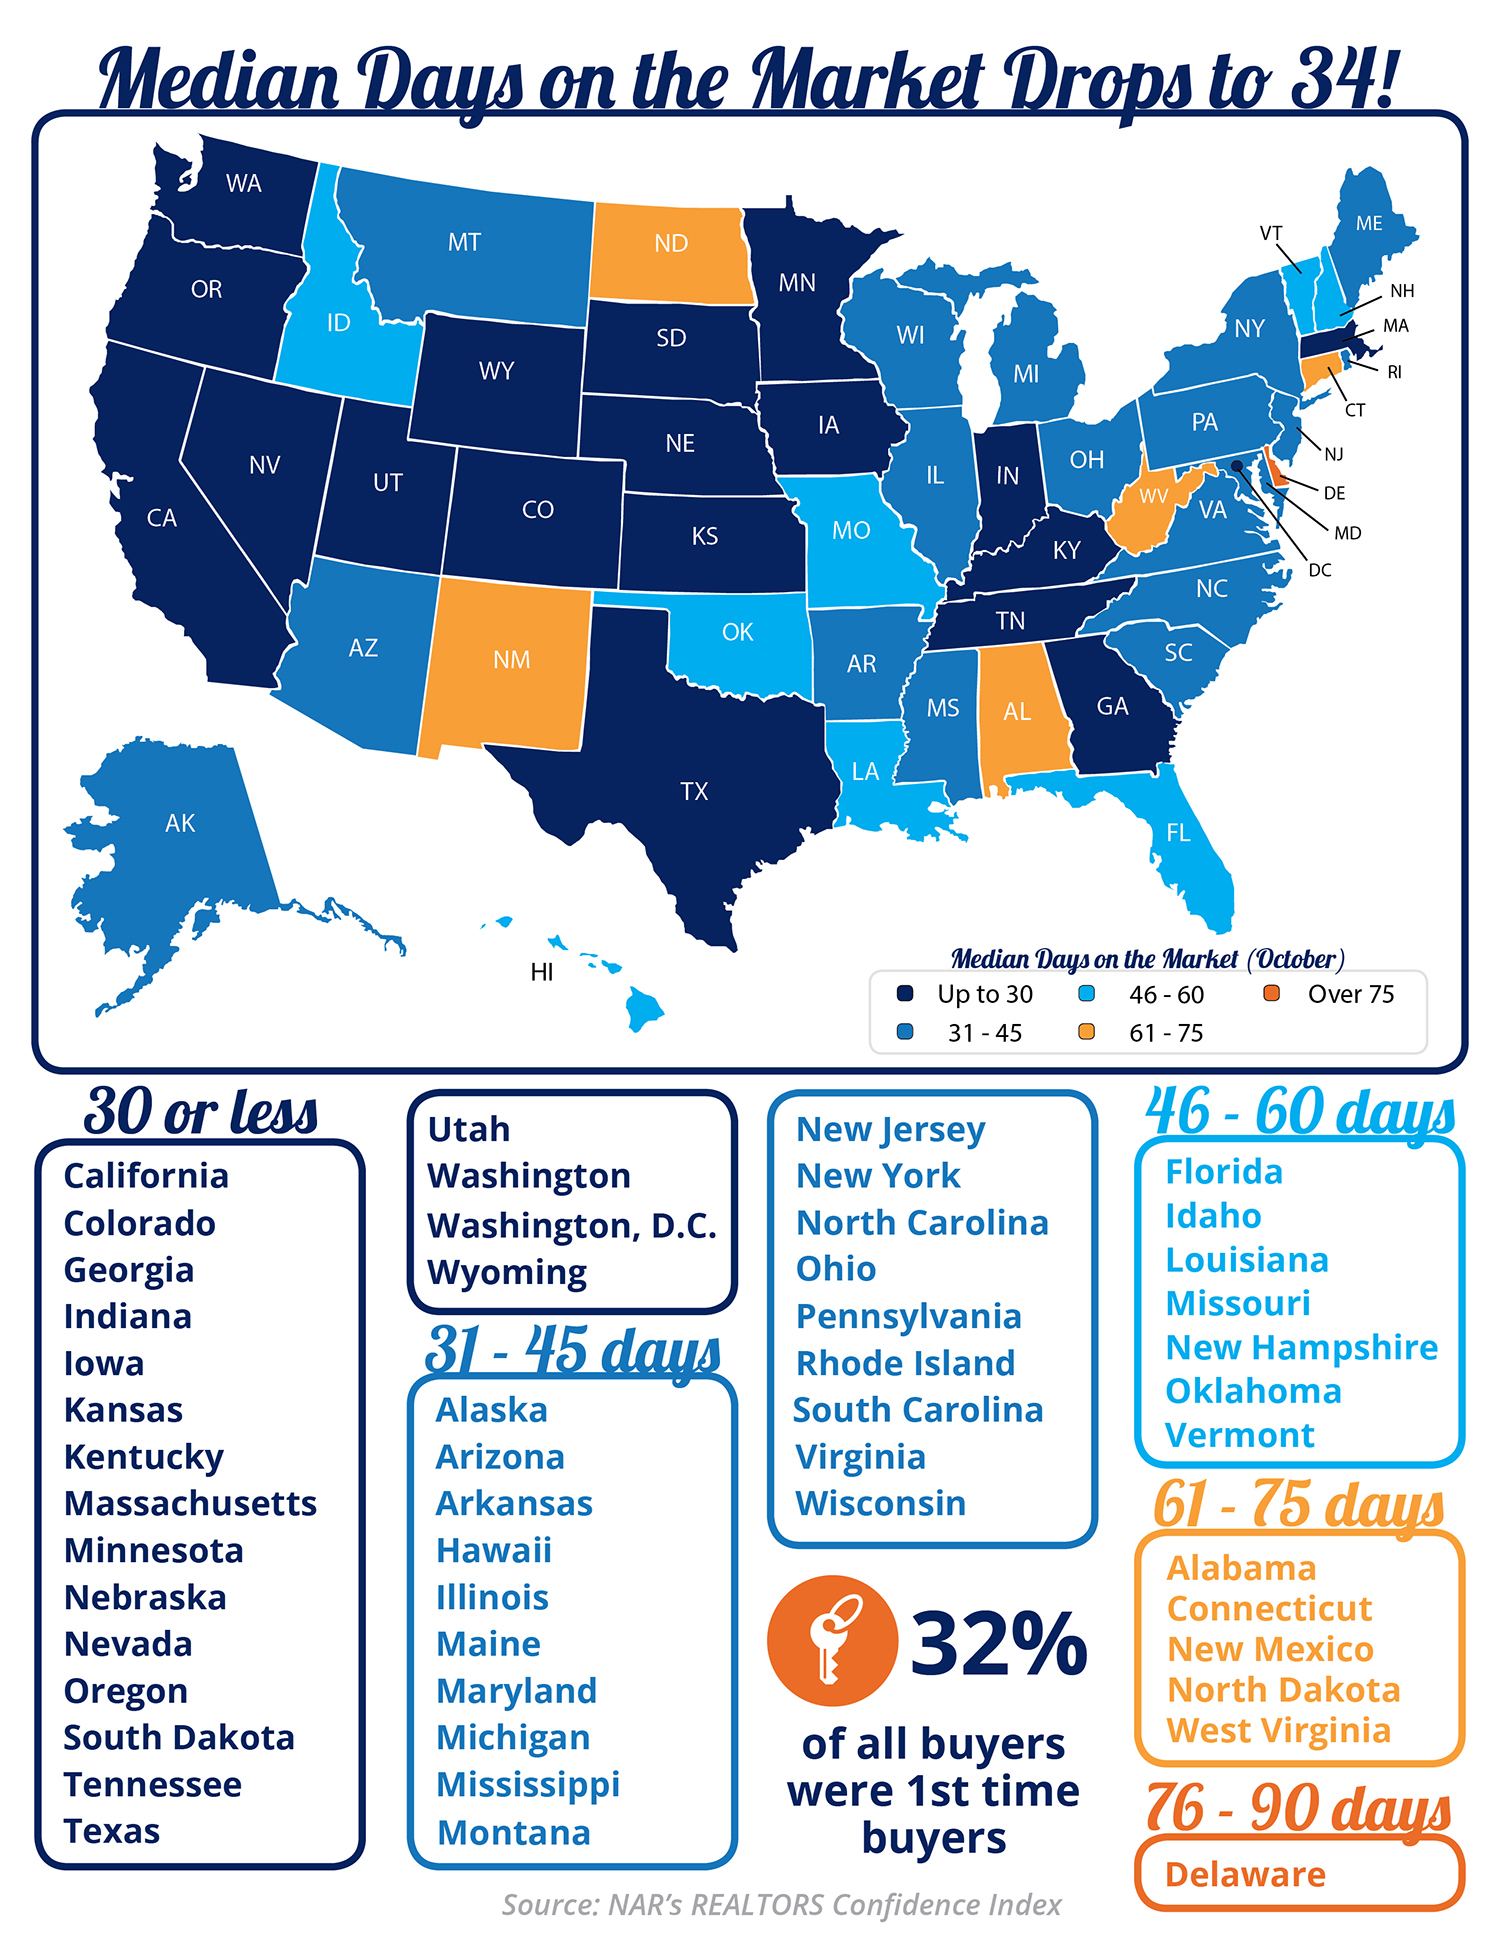 Median Days on the Market Drops to 34! [INFOGRAPHIC] | Simplifying The Market 